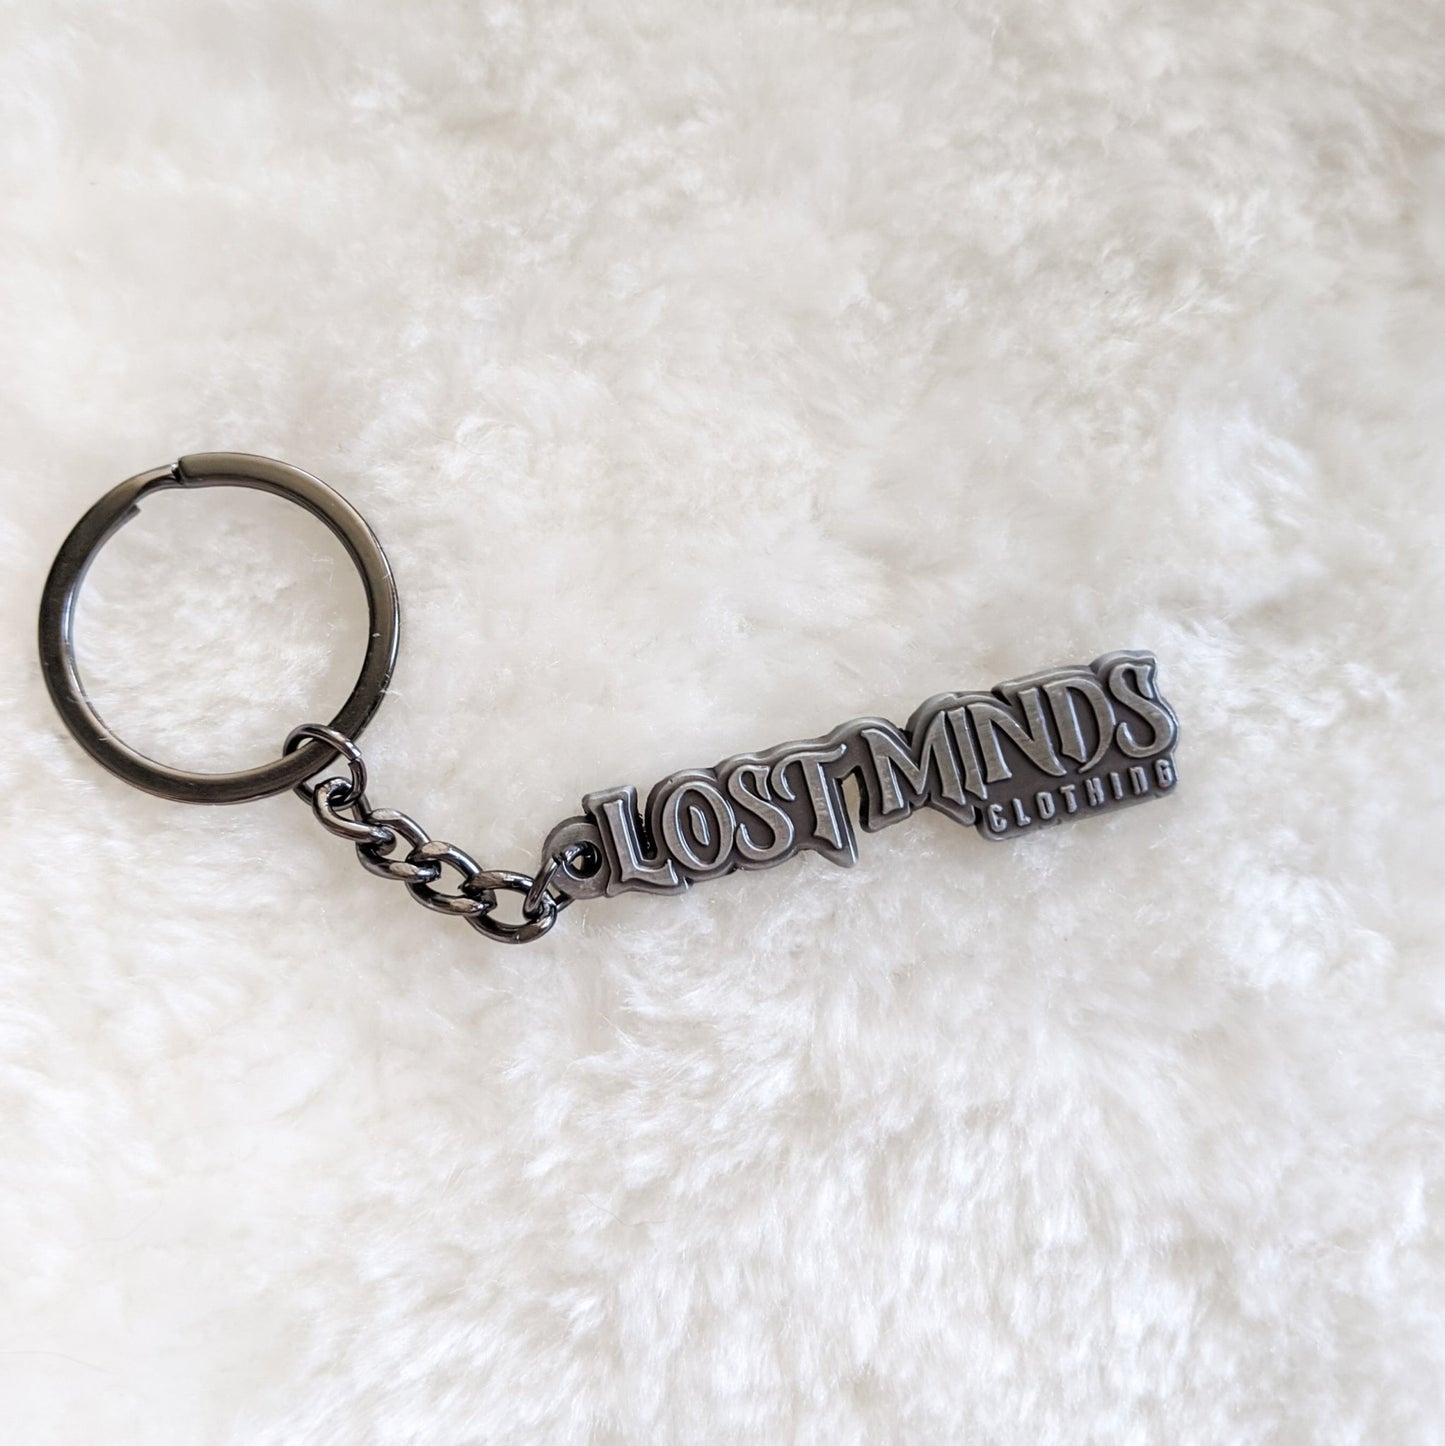 Lost Minds Keychain - Gunmetal - Lost Minds Clothing